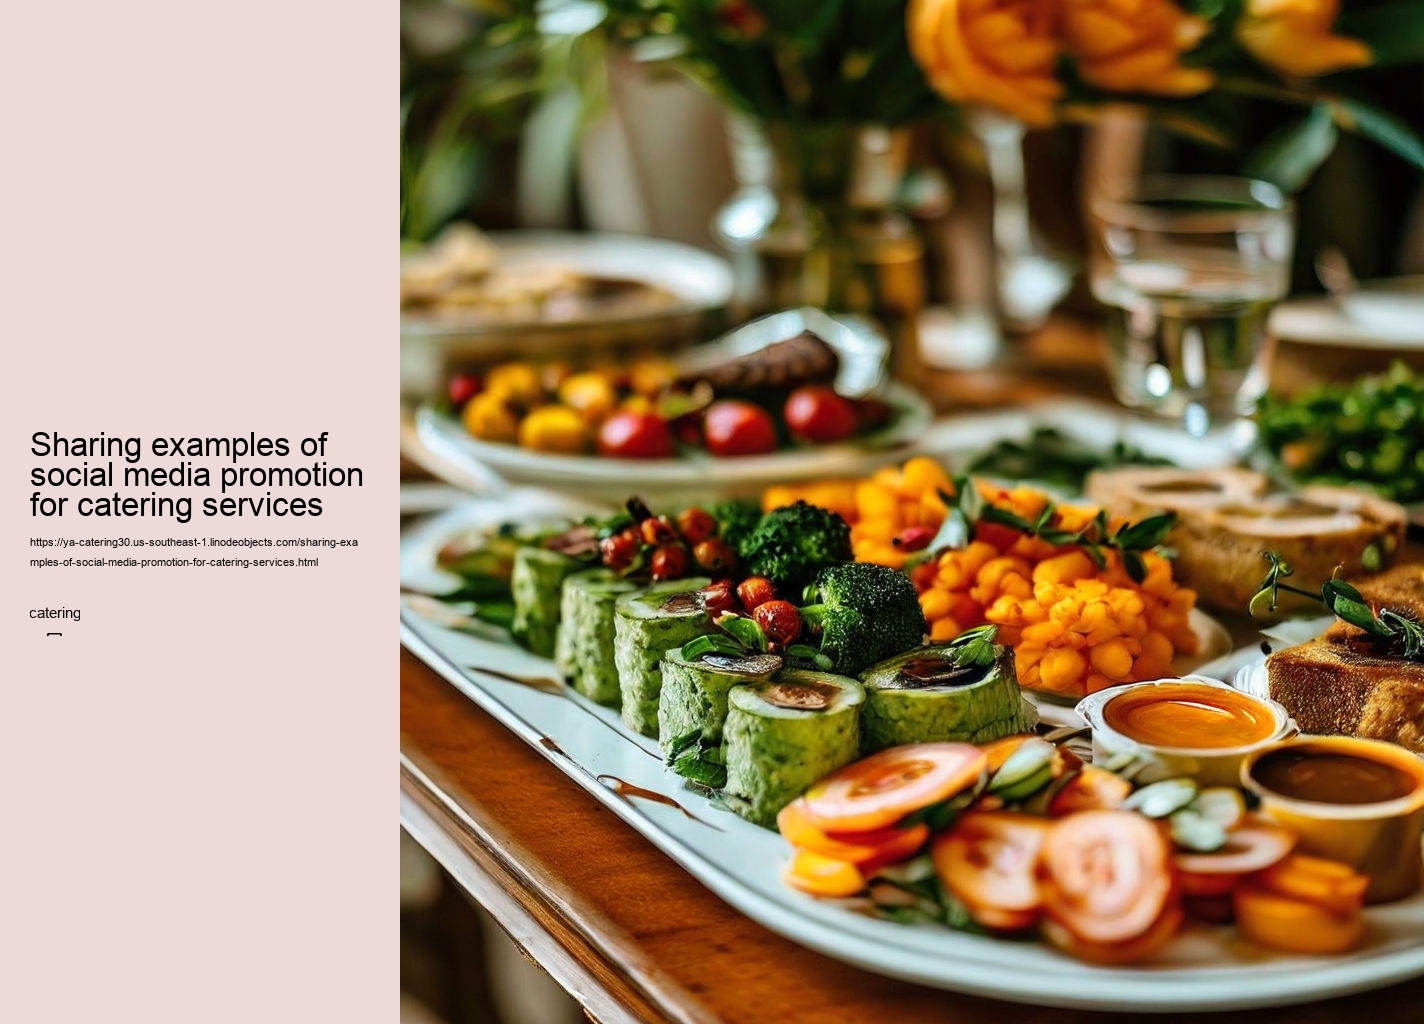 Sharing examples of social media promotion for catering services